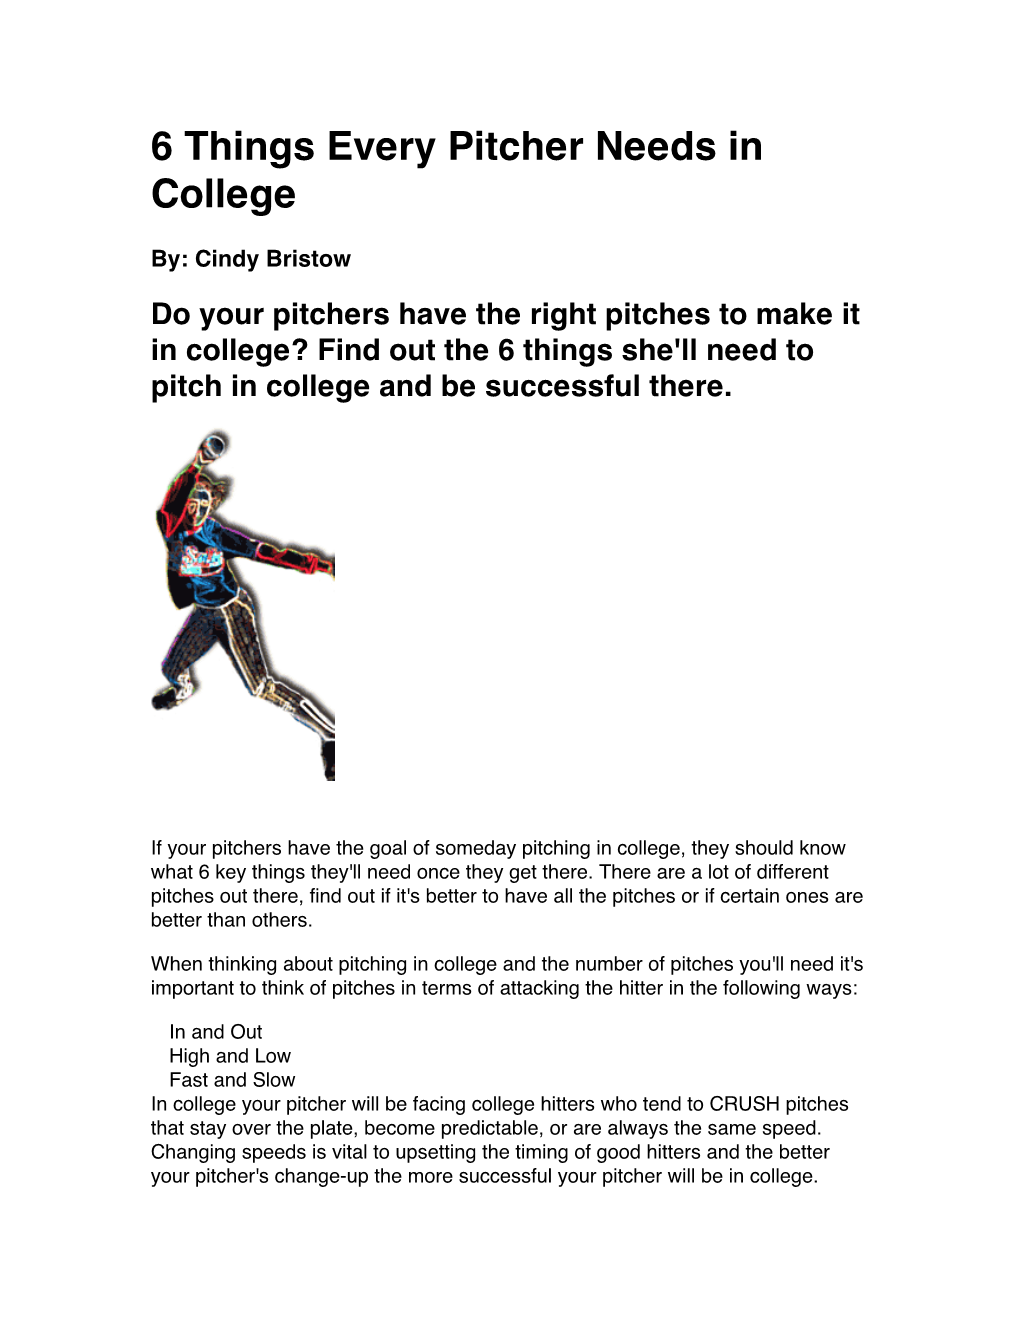 Do Your Pitchers Have the Right Pitches to Make It in College? Find out the 6 Things She'll Need to Pitch in College and Be Successful There